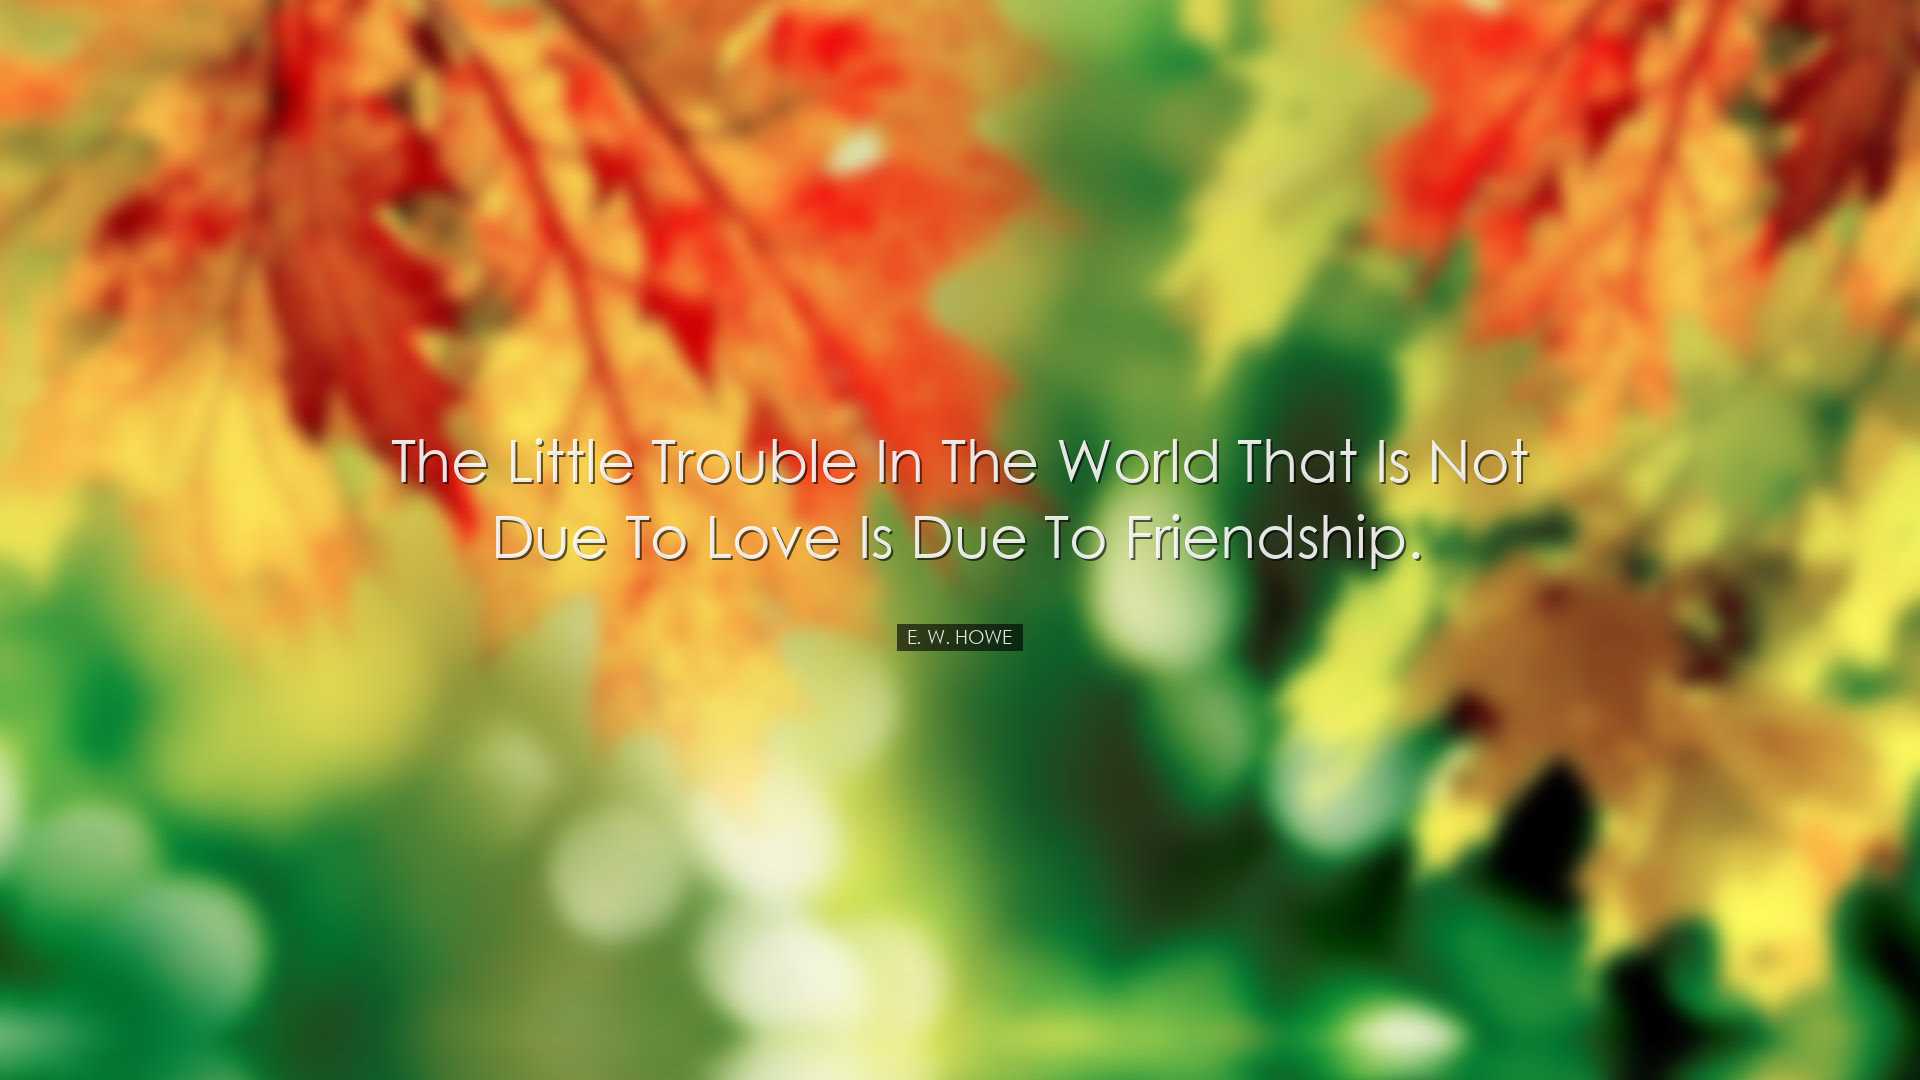 The little trouble in the world that is not due to love is due to